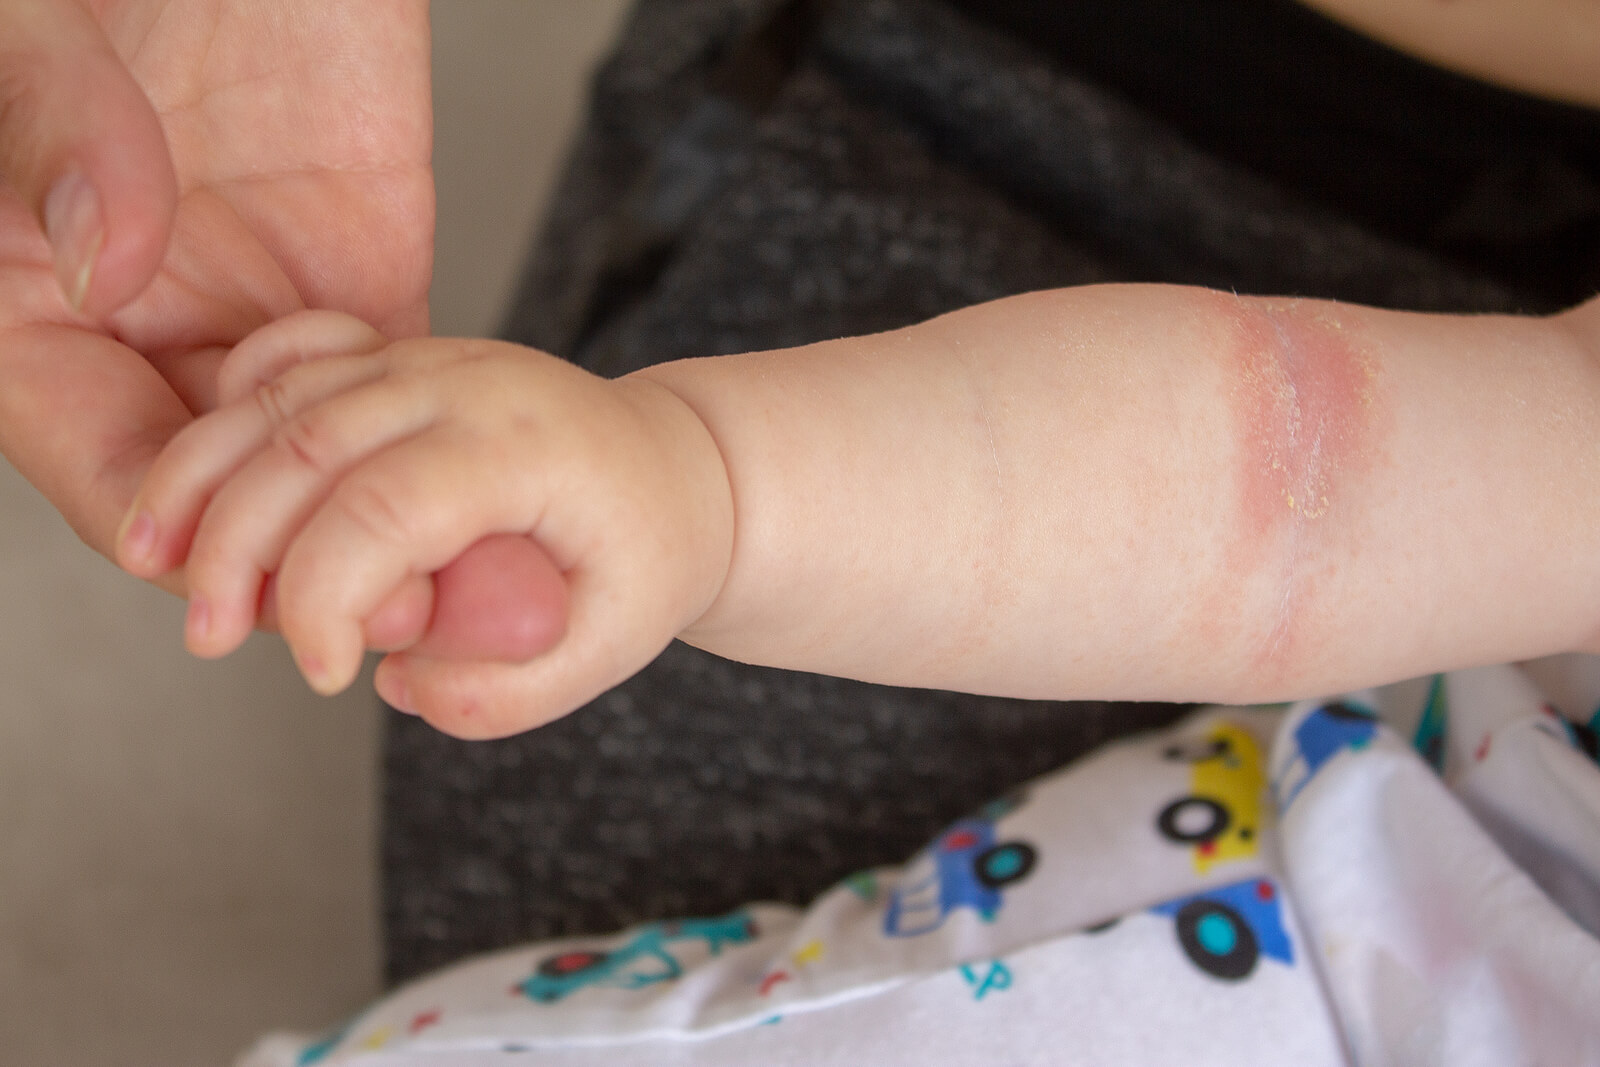 A baby with a skin rash on his arm.